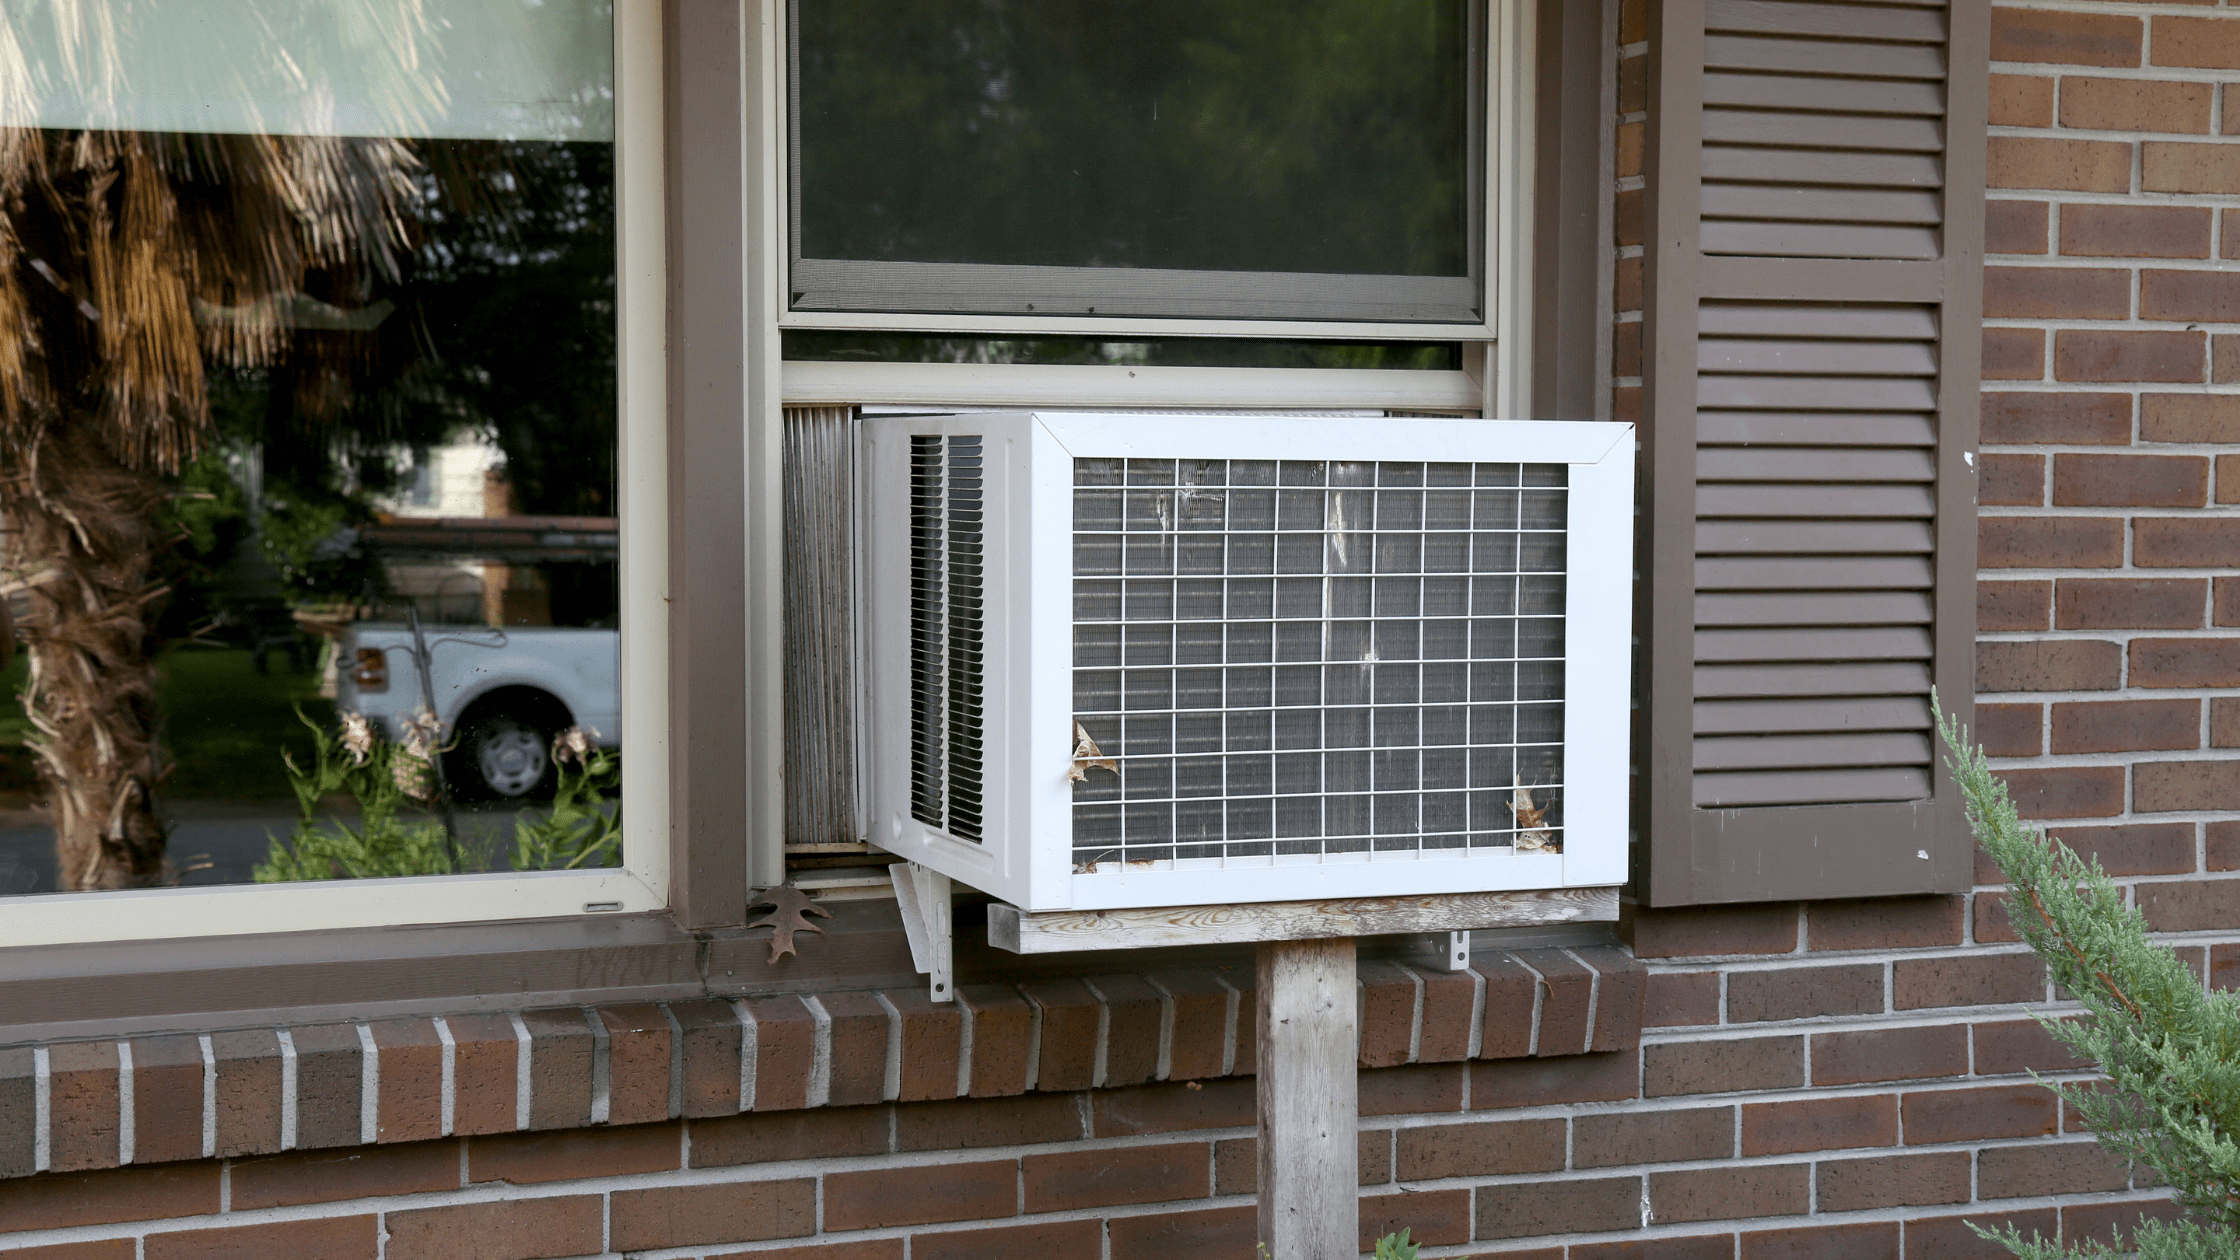 How To Clean A Window Air Conditioner Without Removing It